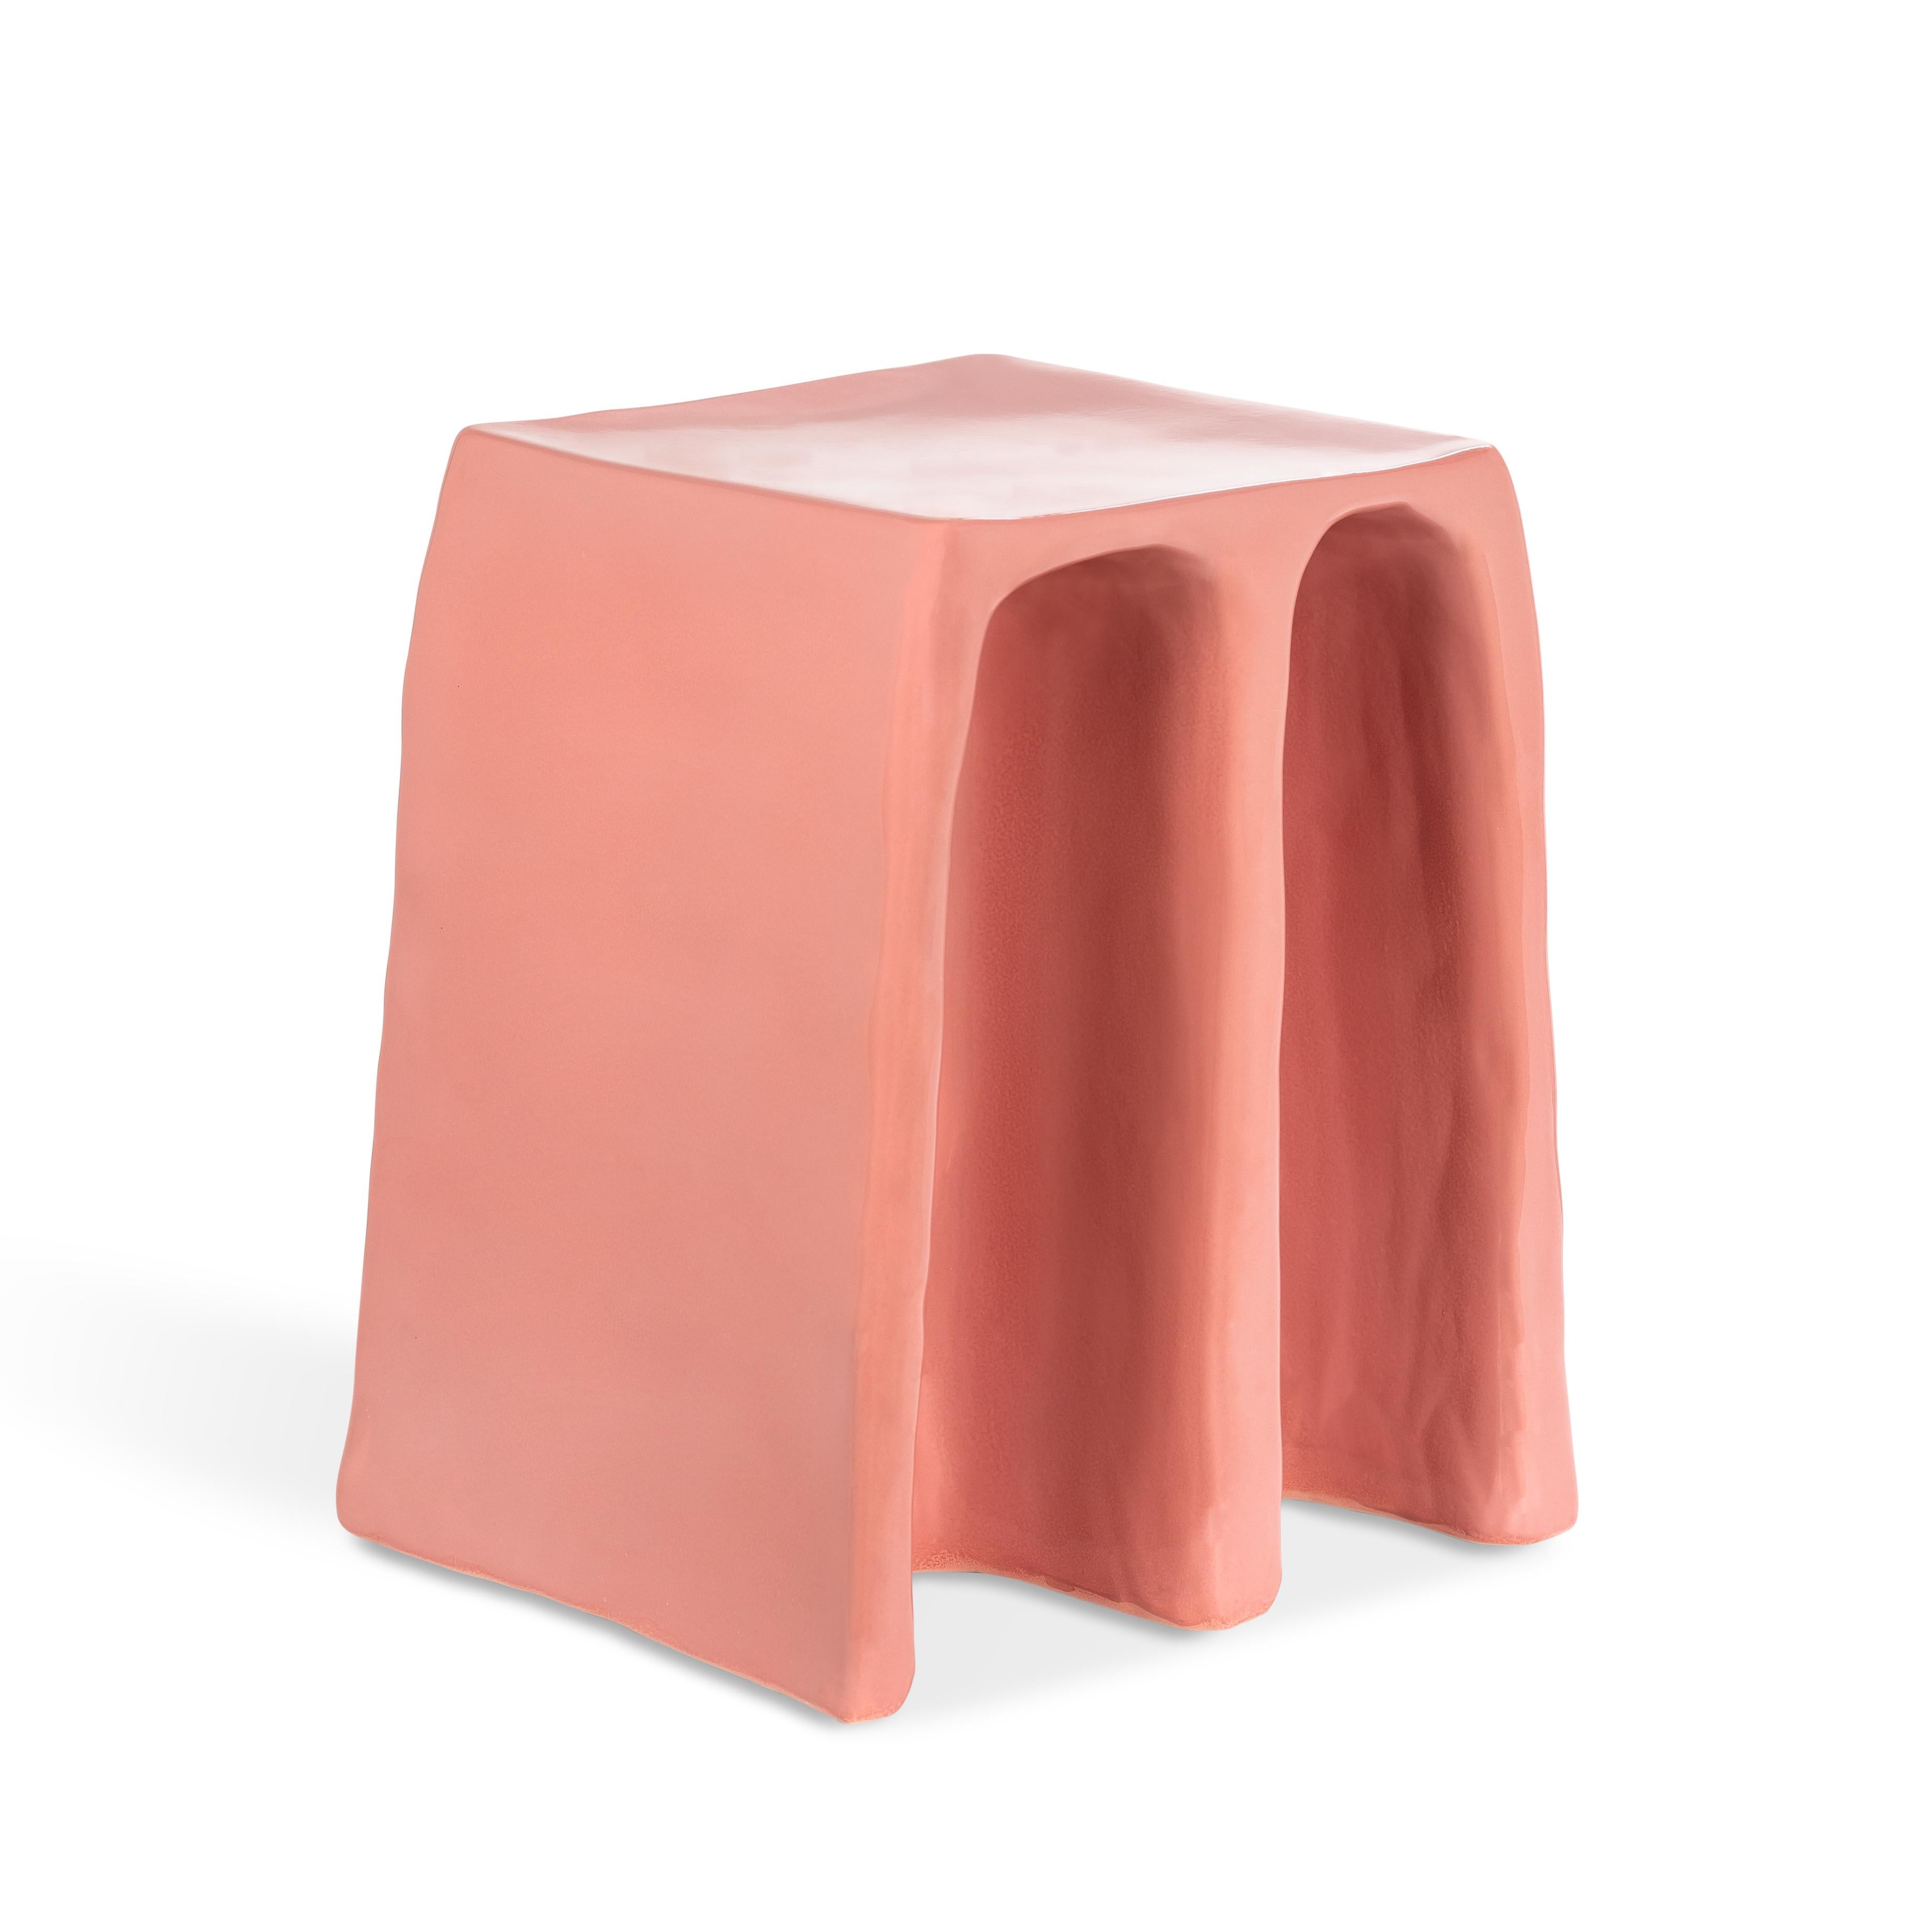 Chouchou rose stool by Pulpo
Dimensions: D35 x W30 x H43 cm
Materials: ceramic

Also available in different colours. 

Whether stool or storage table, piece of column or inspired by the wrinkled folds of a curtain: in any case, chouchou is a